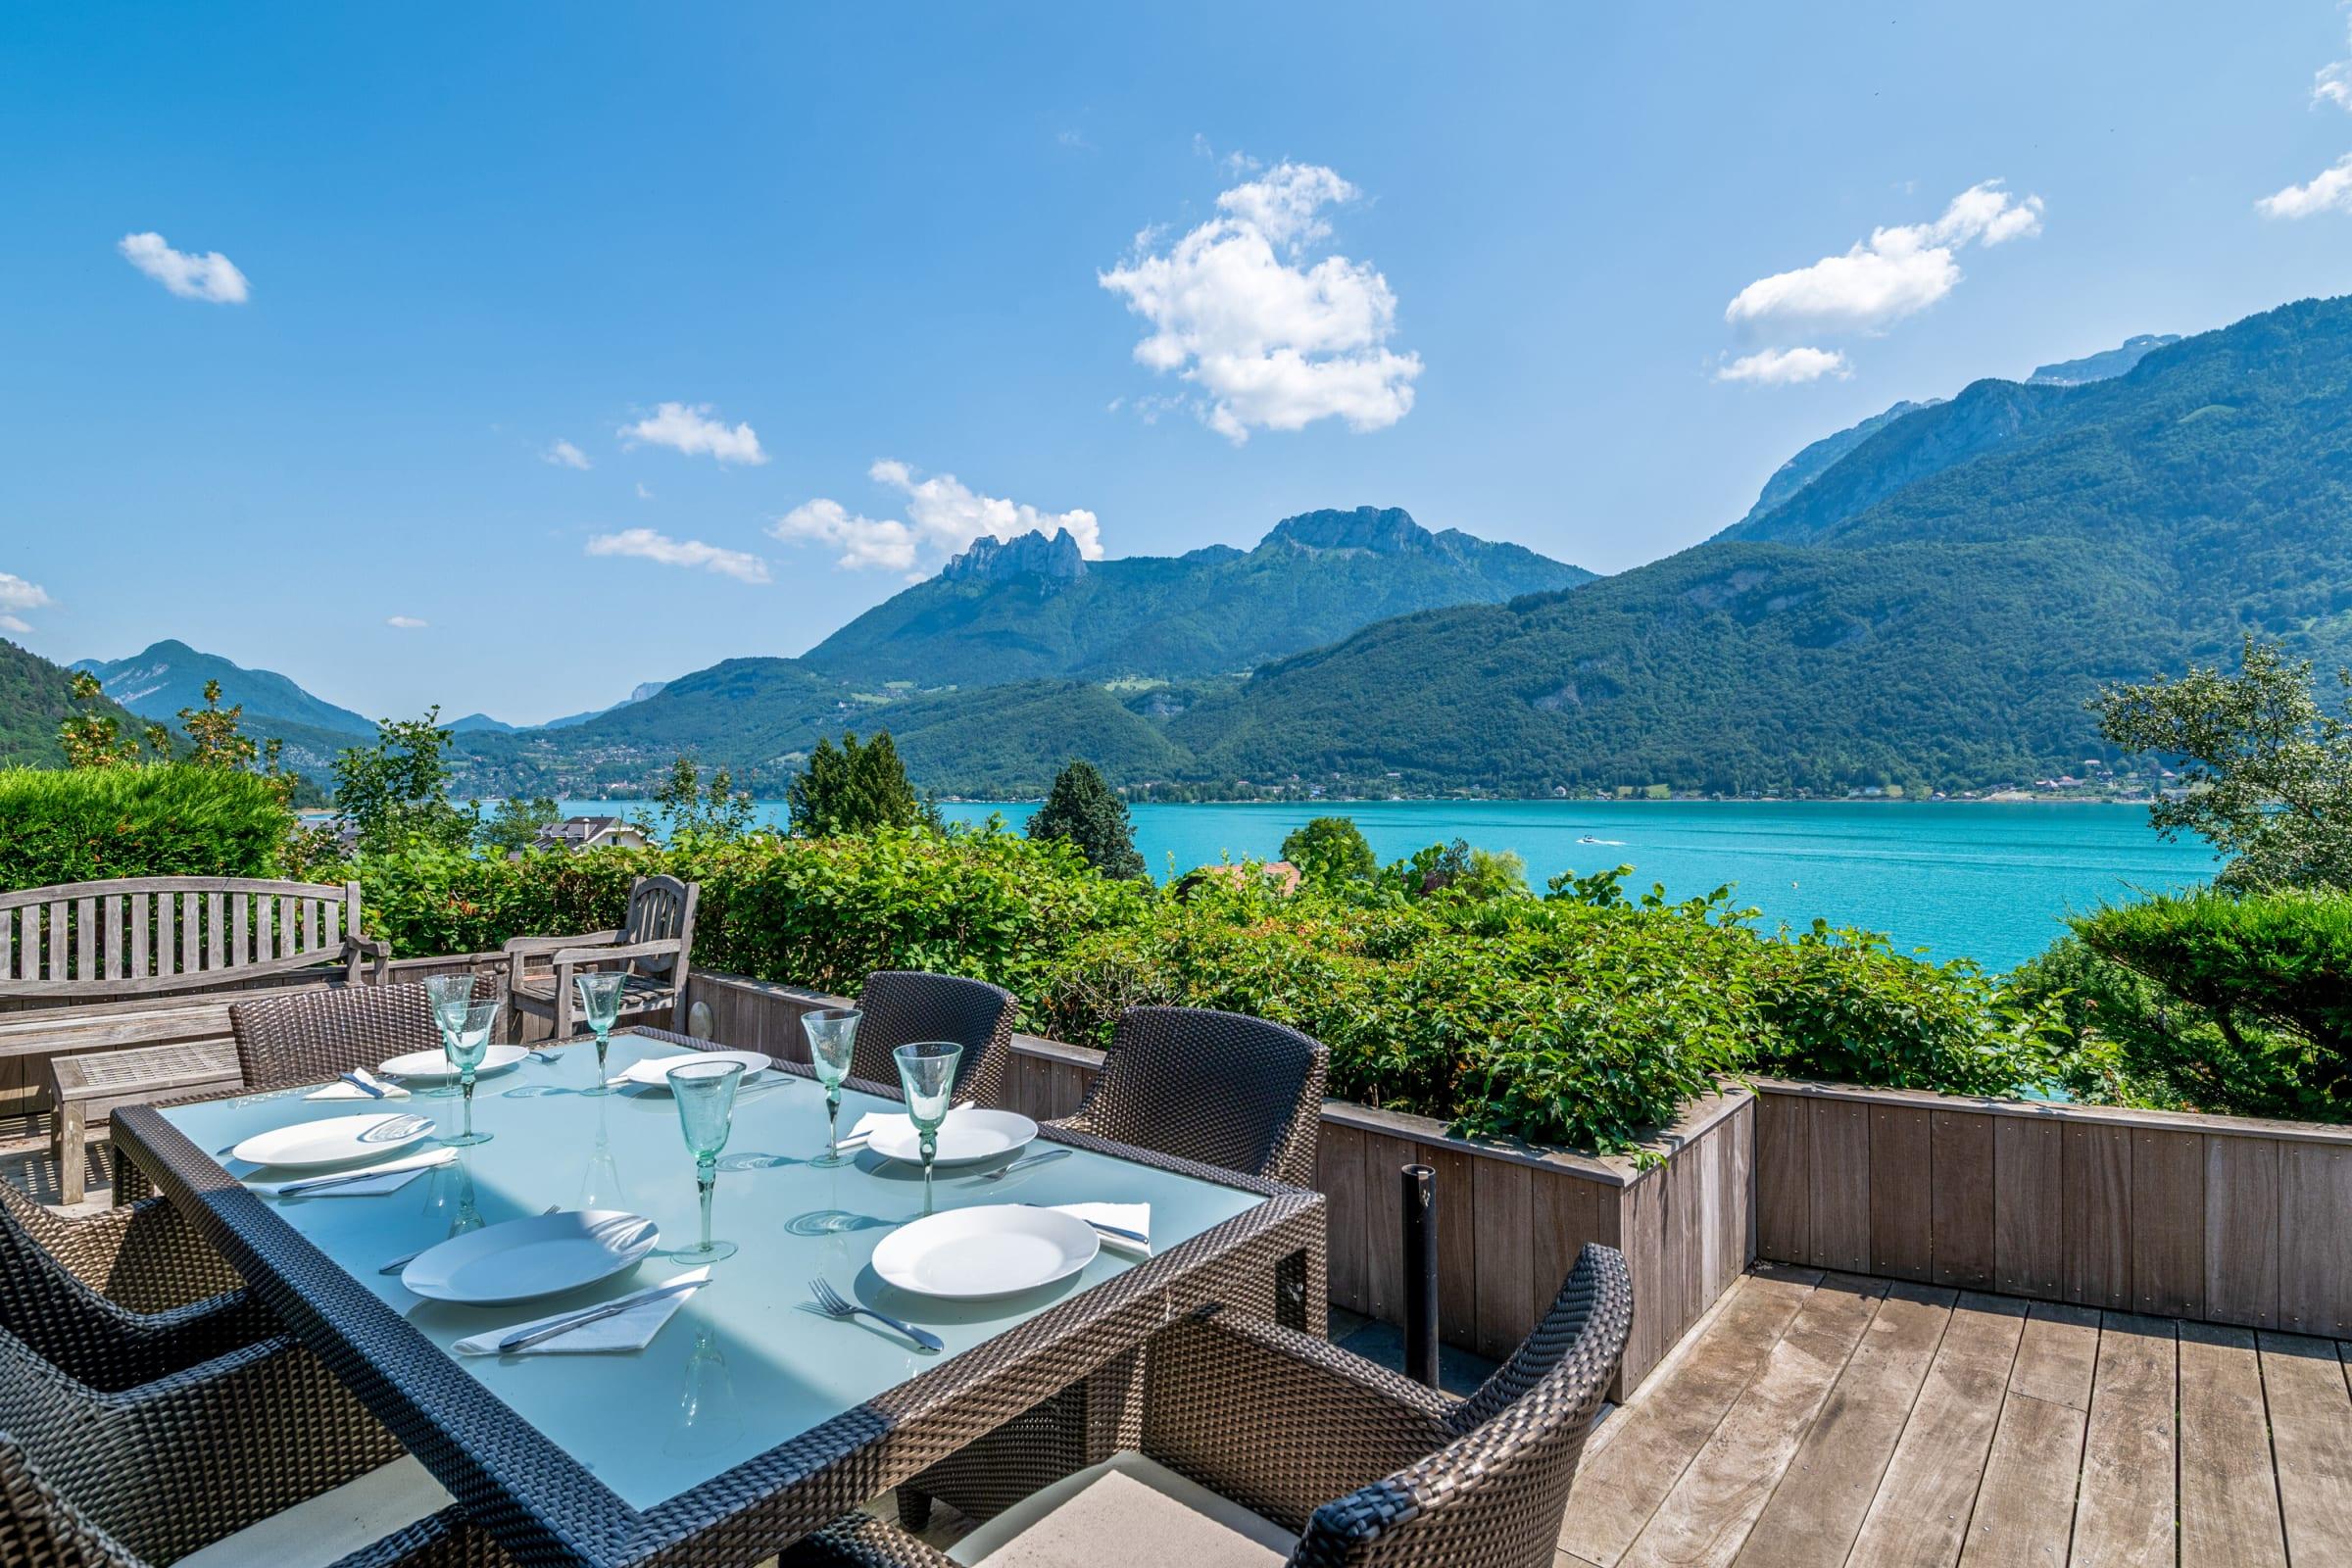 Property Image 1 - Beautiful and modern chalet with view on the Annecy lake - Property Manager
